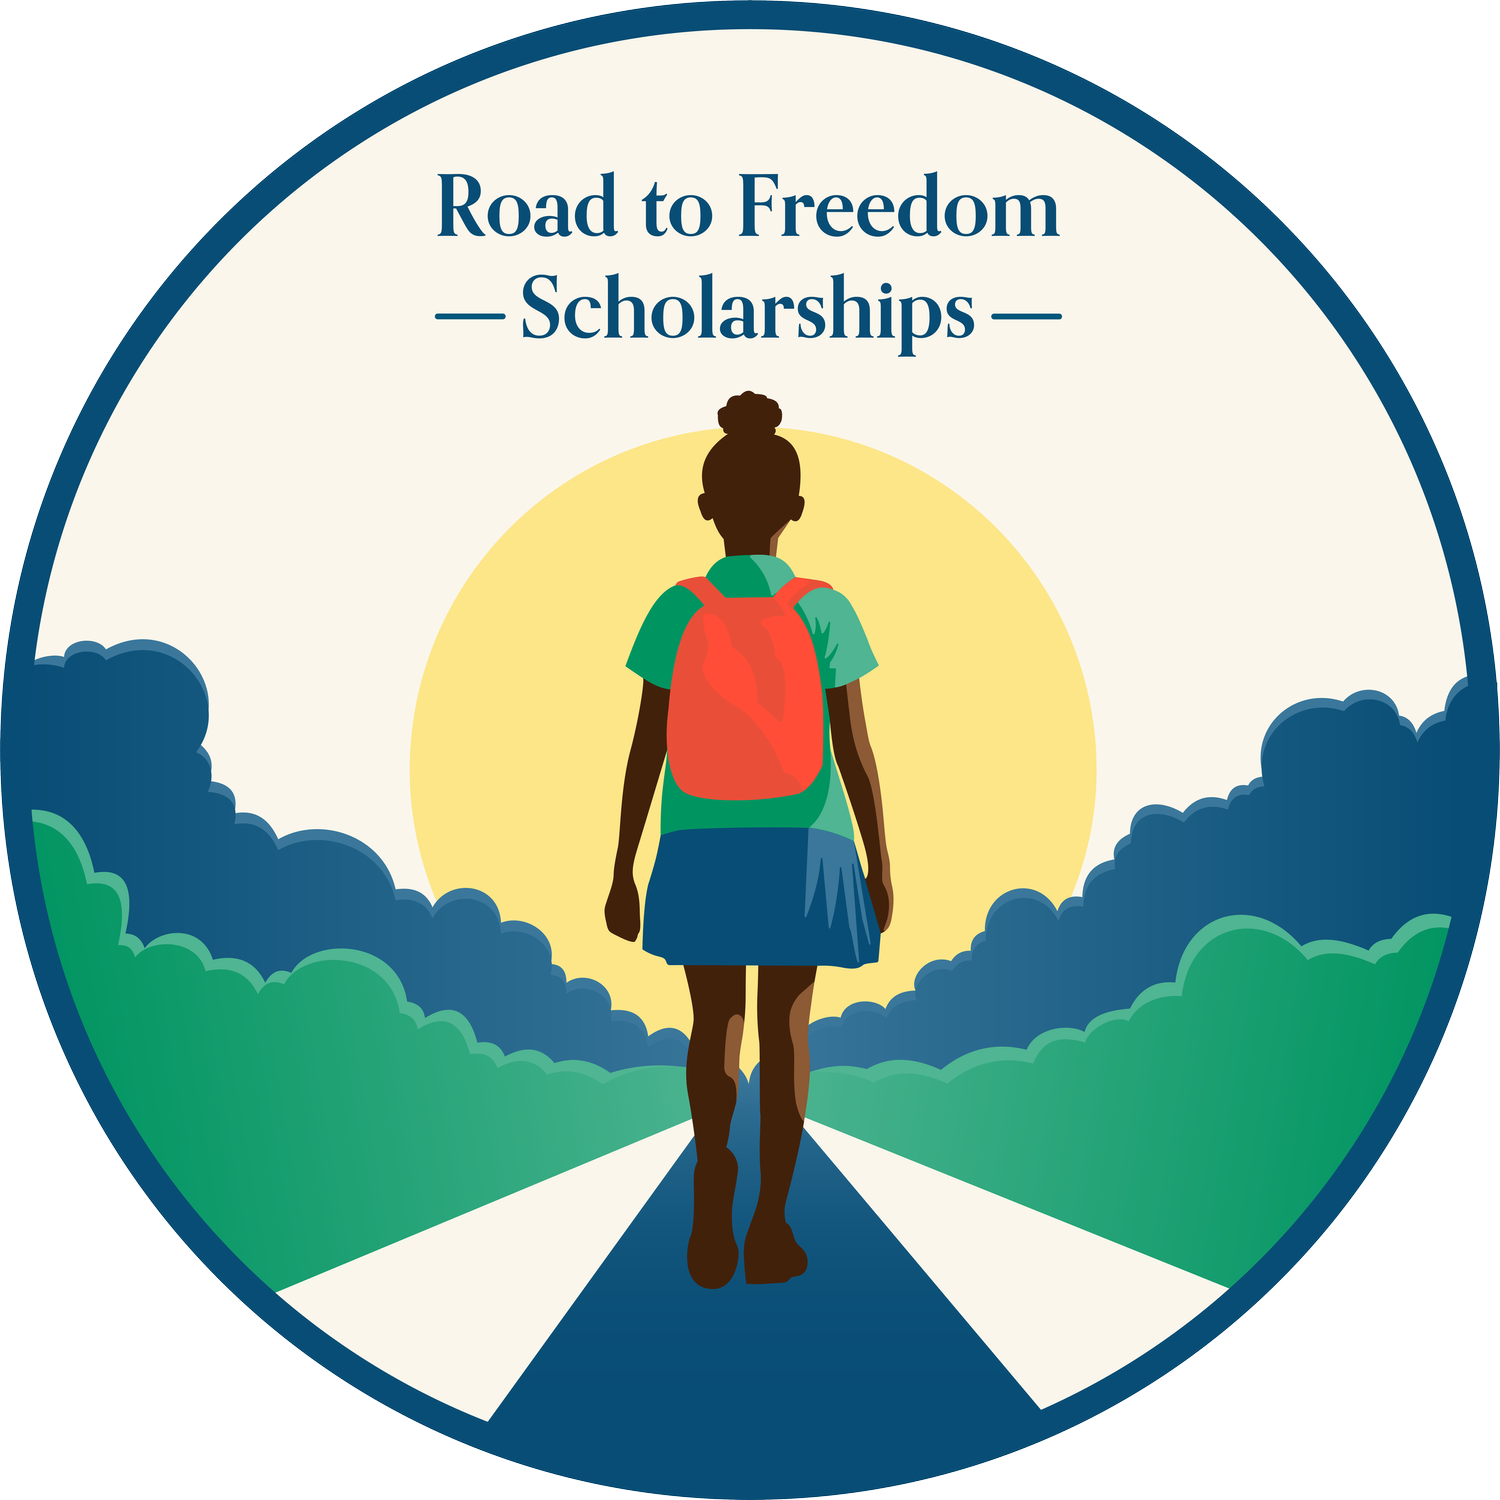 Road to Freedom Scholarships